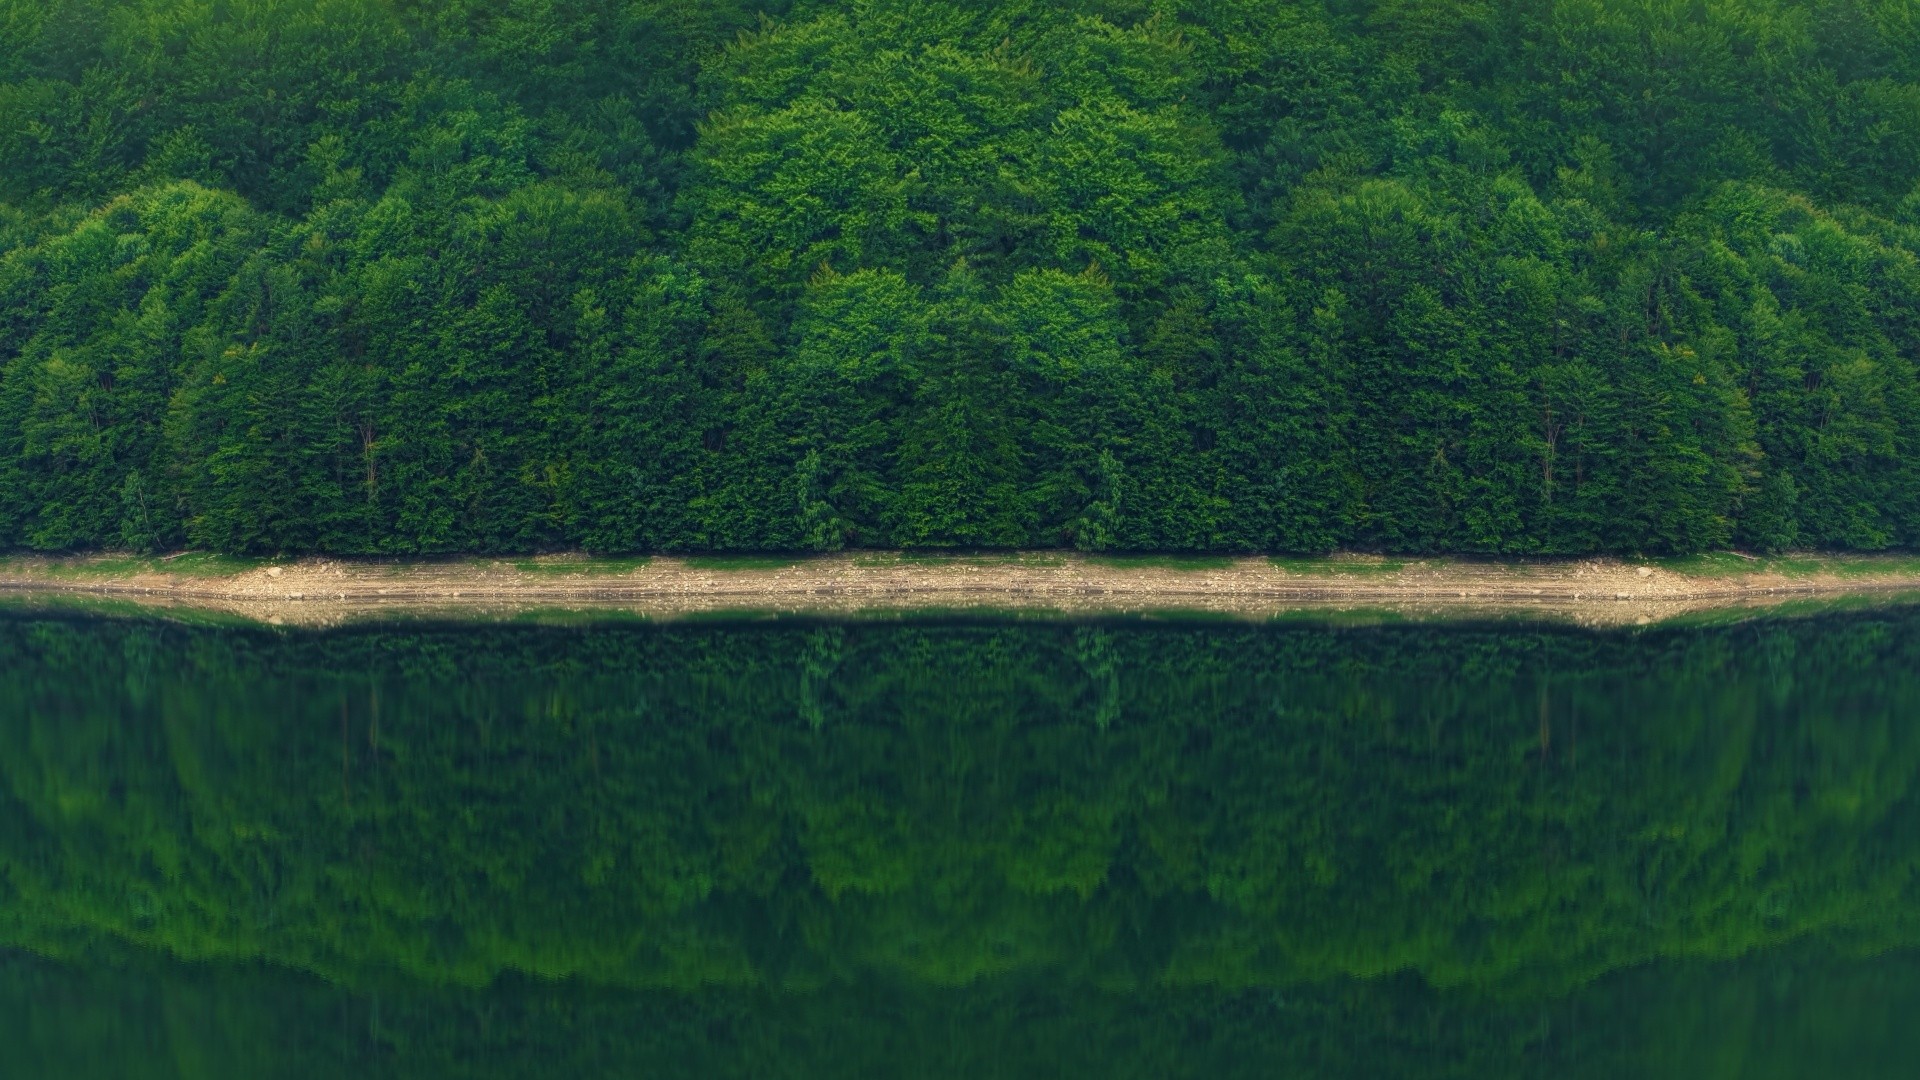 General 1920x1080 photography nature forest landscape trees river reflection Monsoon photoshopped